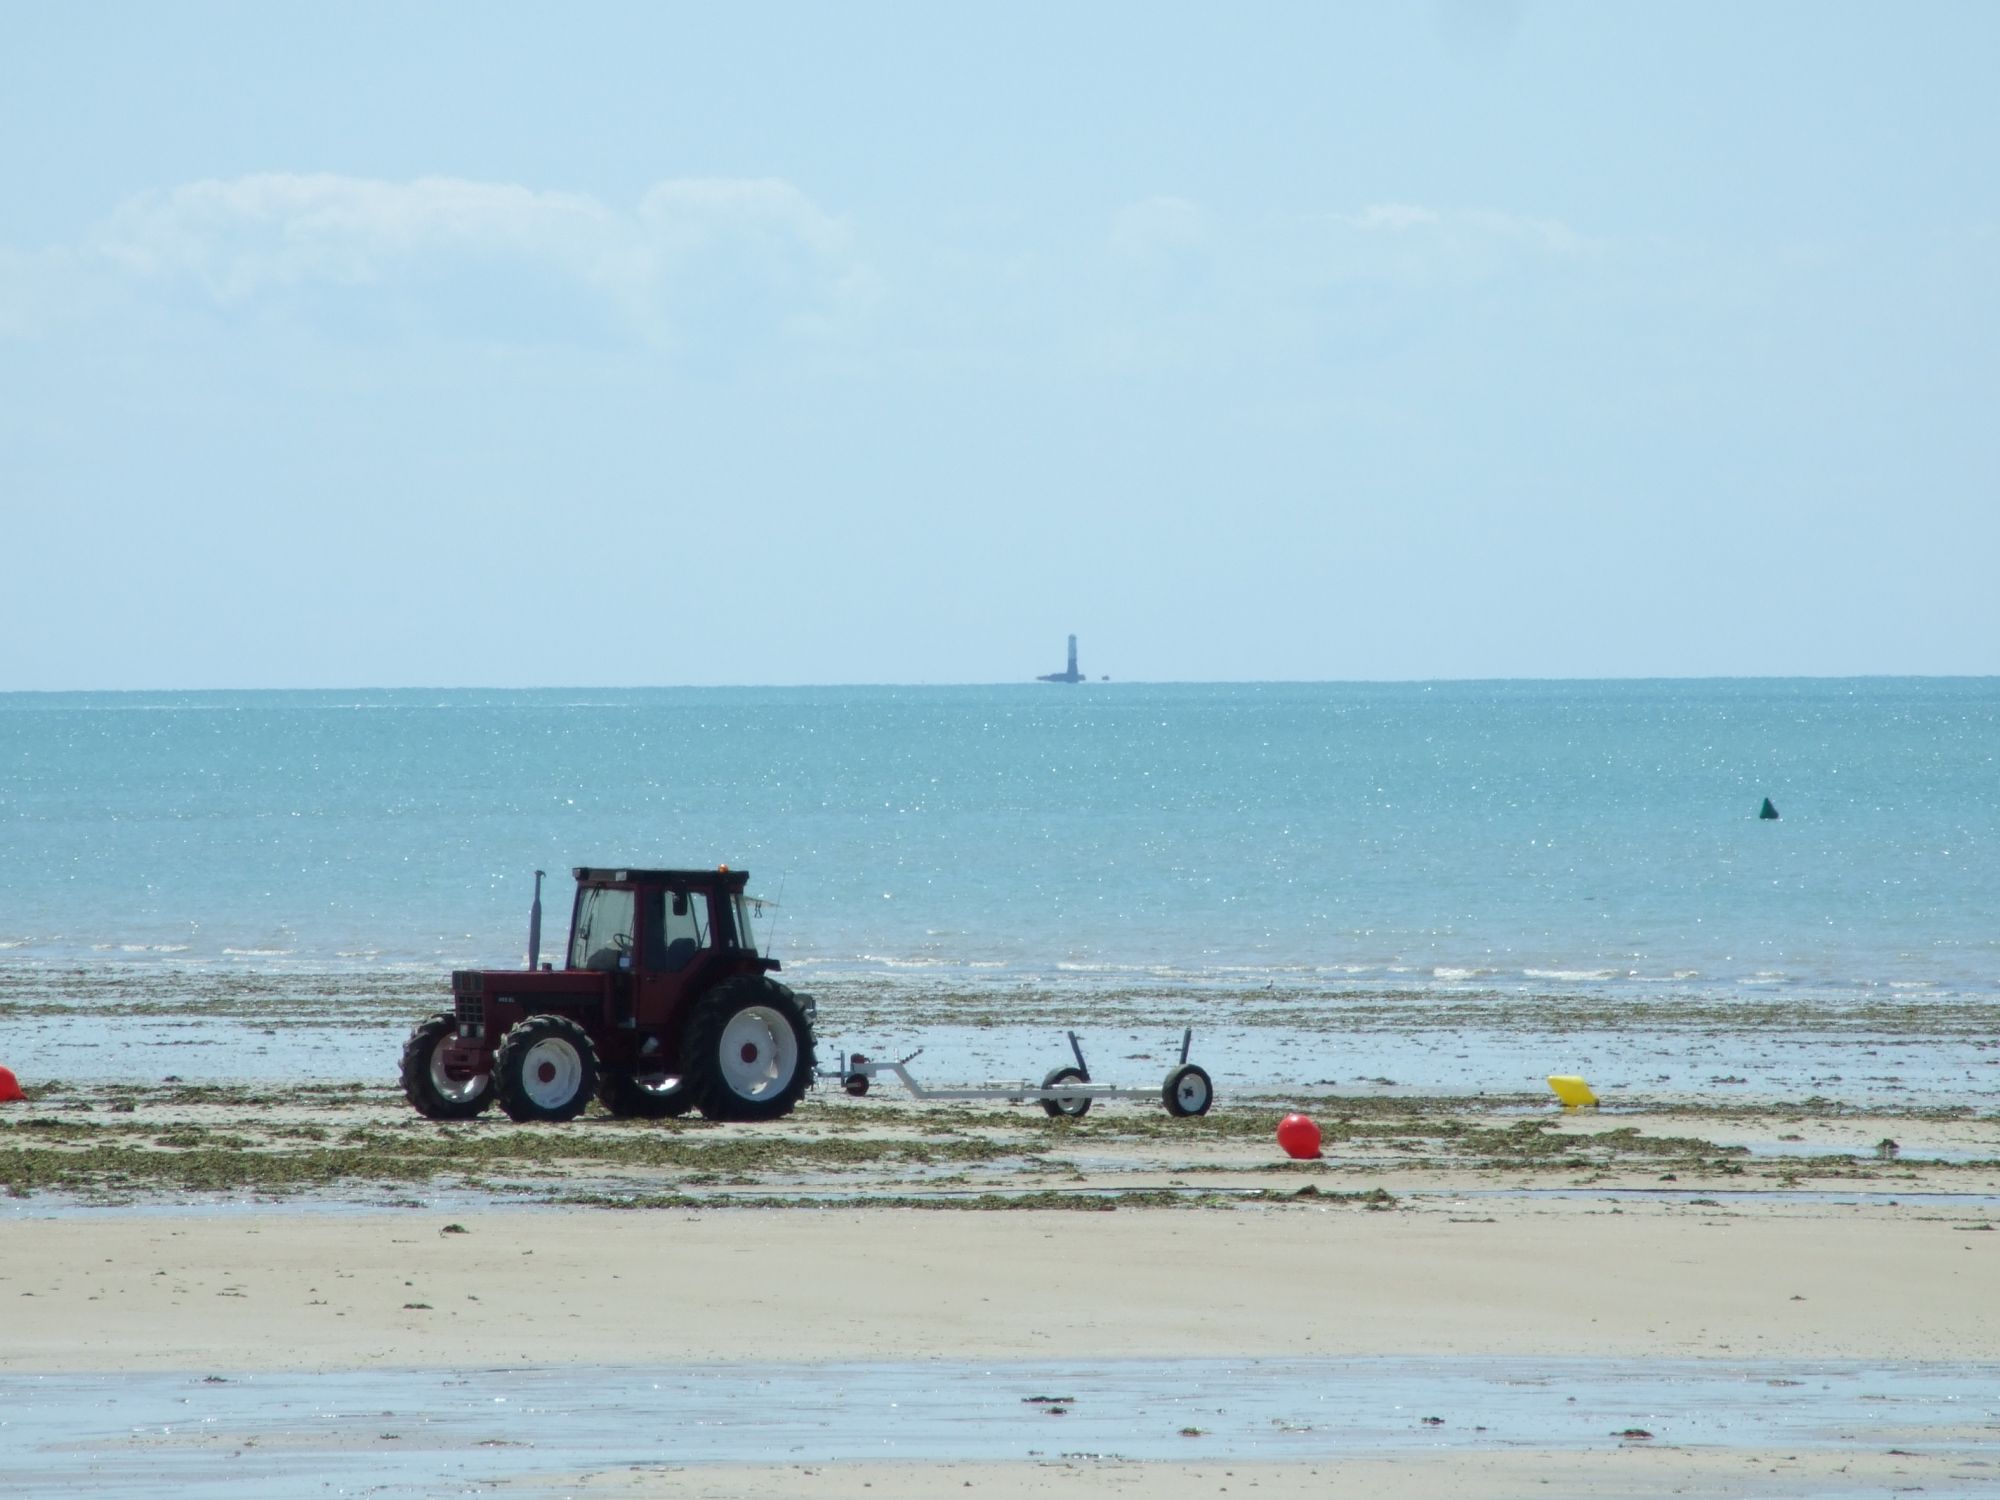 A tractor parked on a beach, looking out to sea with a lighthouse in the distance, almost floating like a mirage.